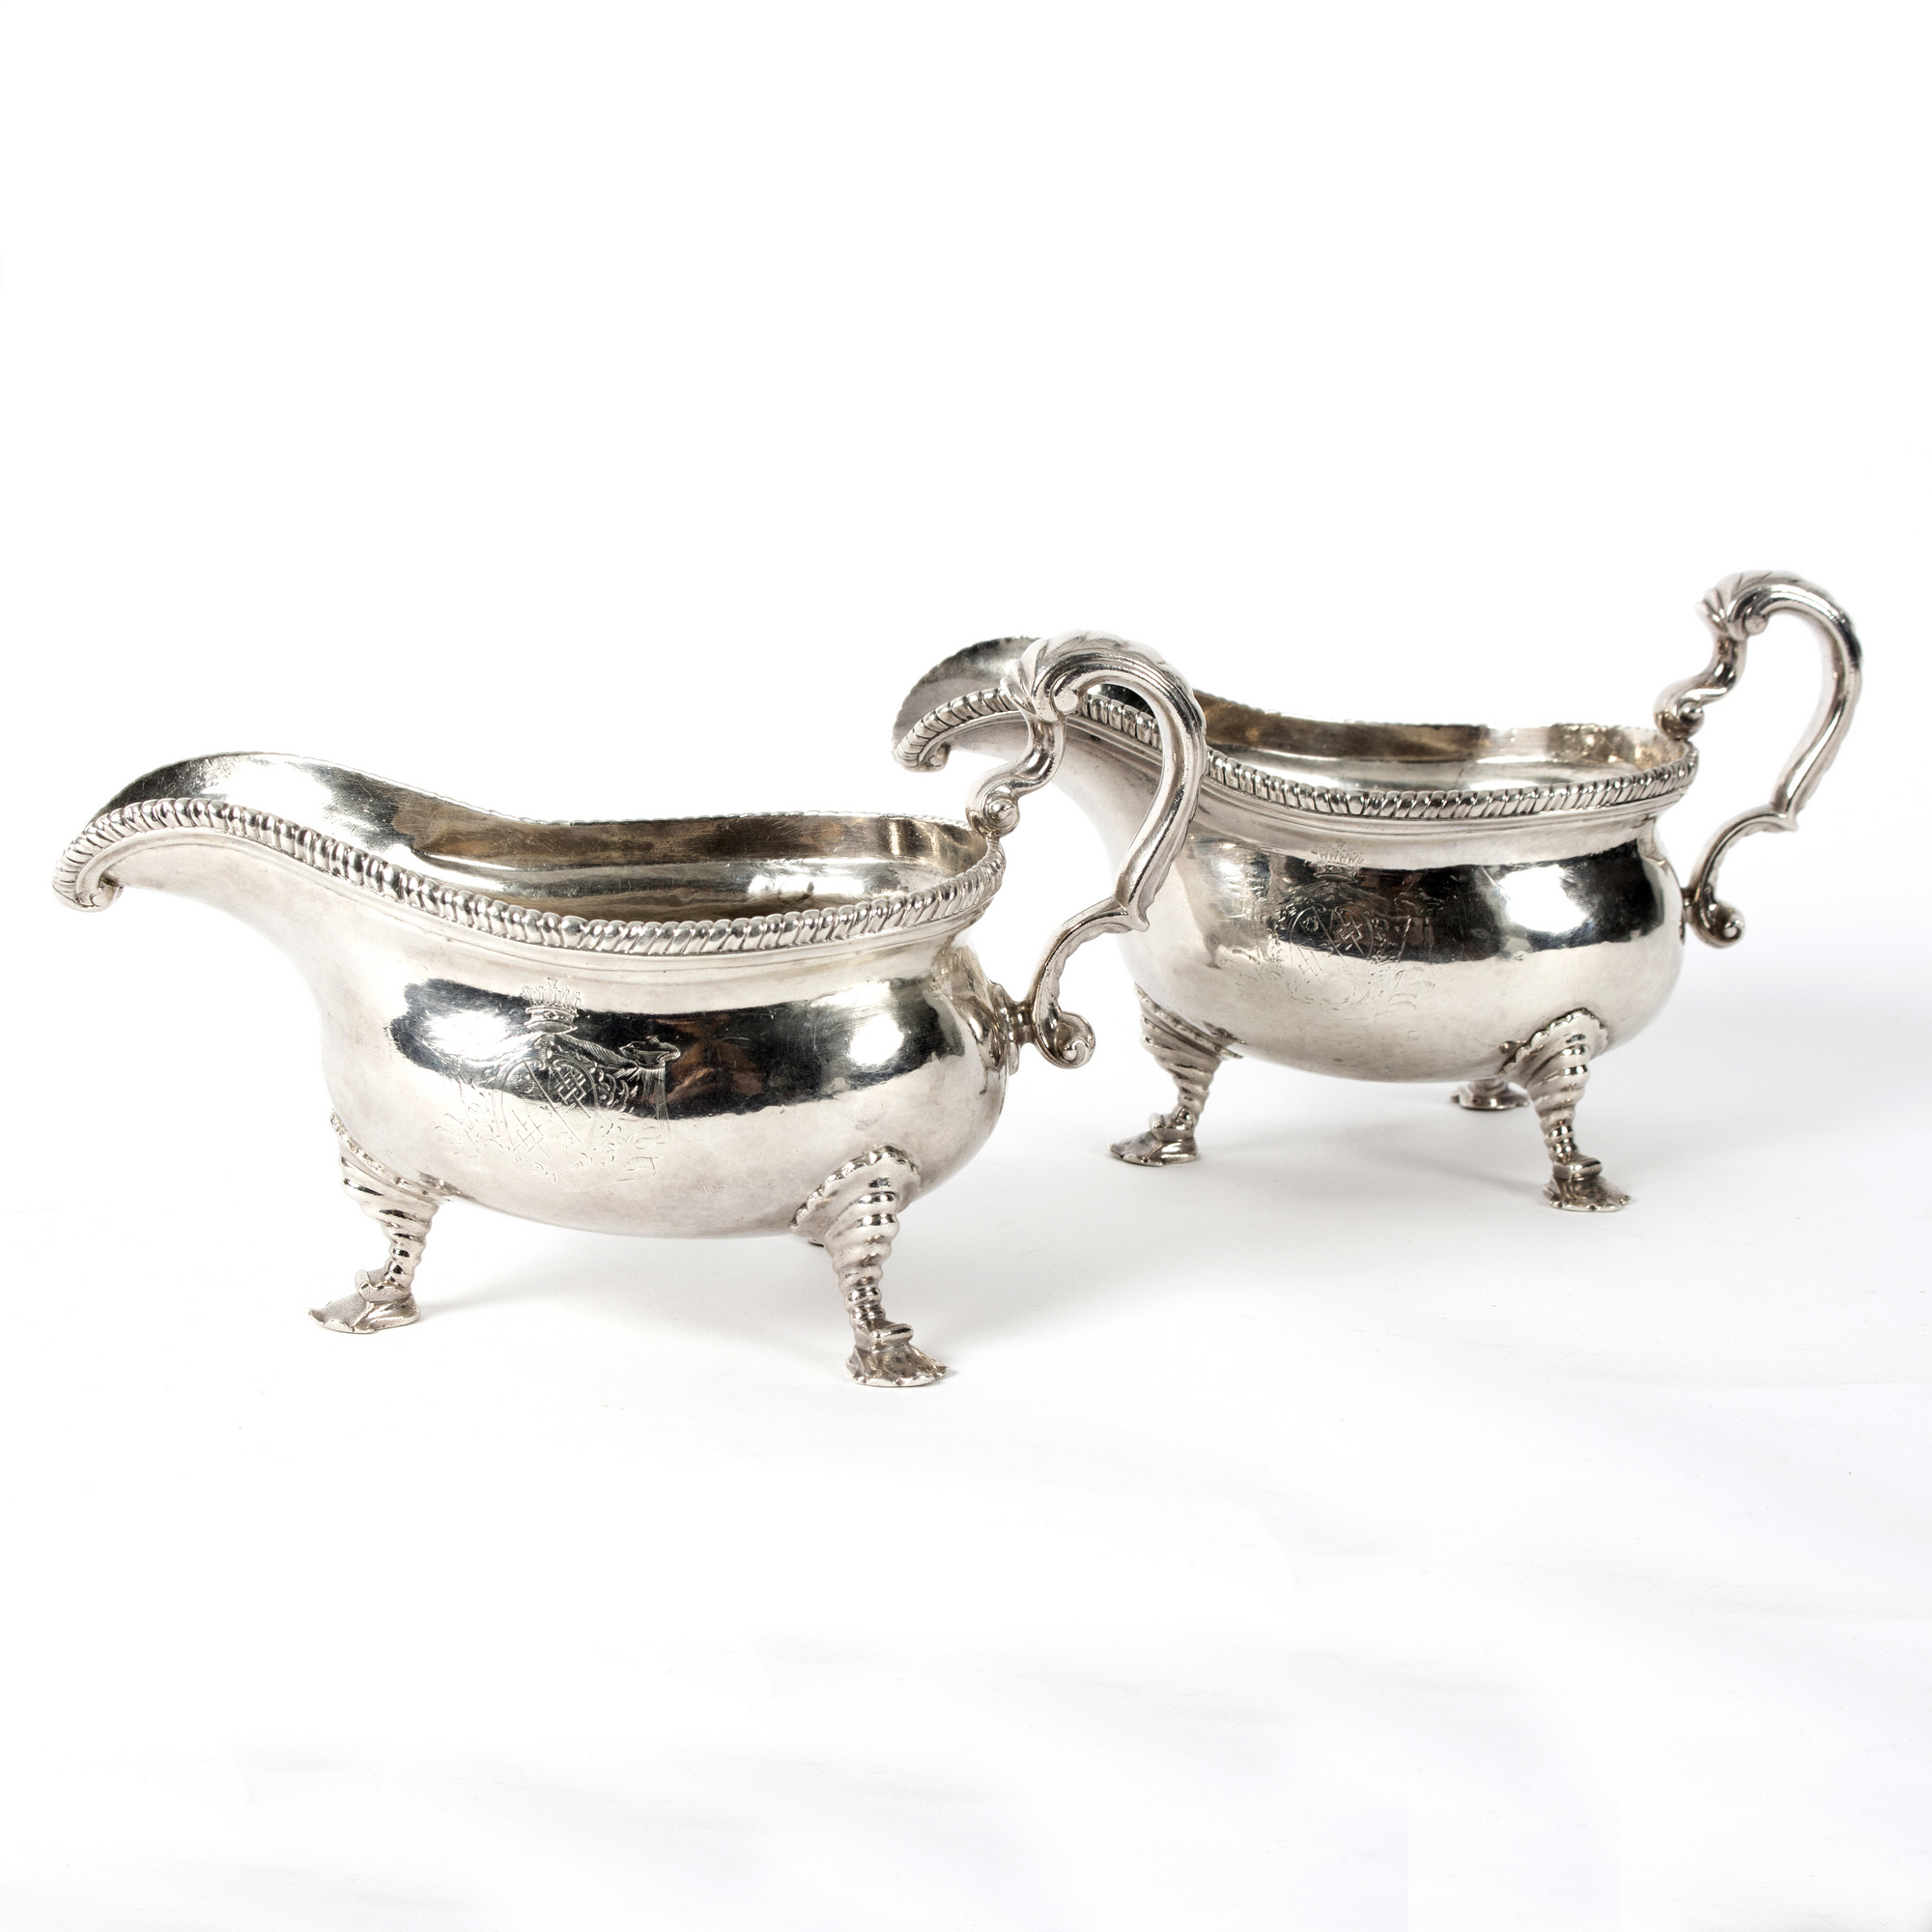 A pair of George II silver sauce boats, maker's mark rubbed, London 1754, each with gadrooned rim,